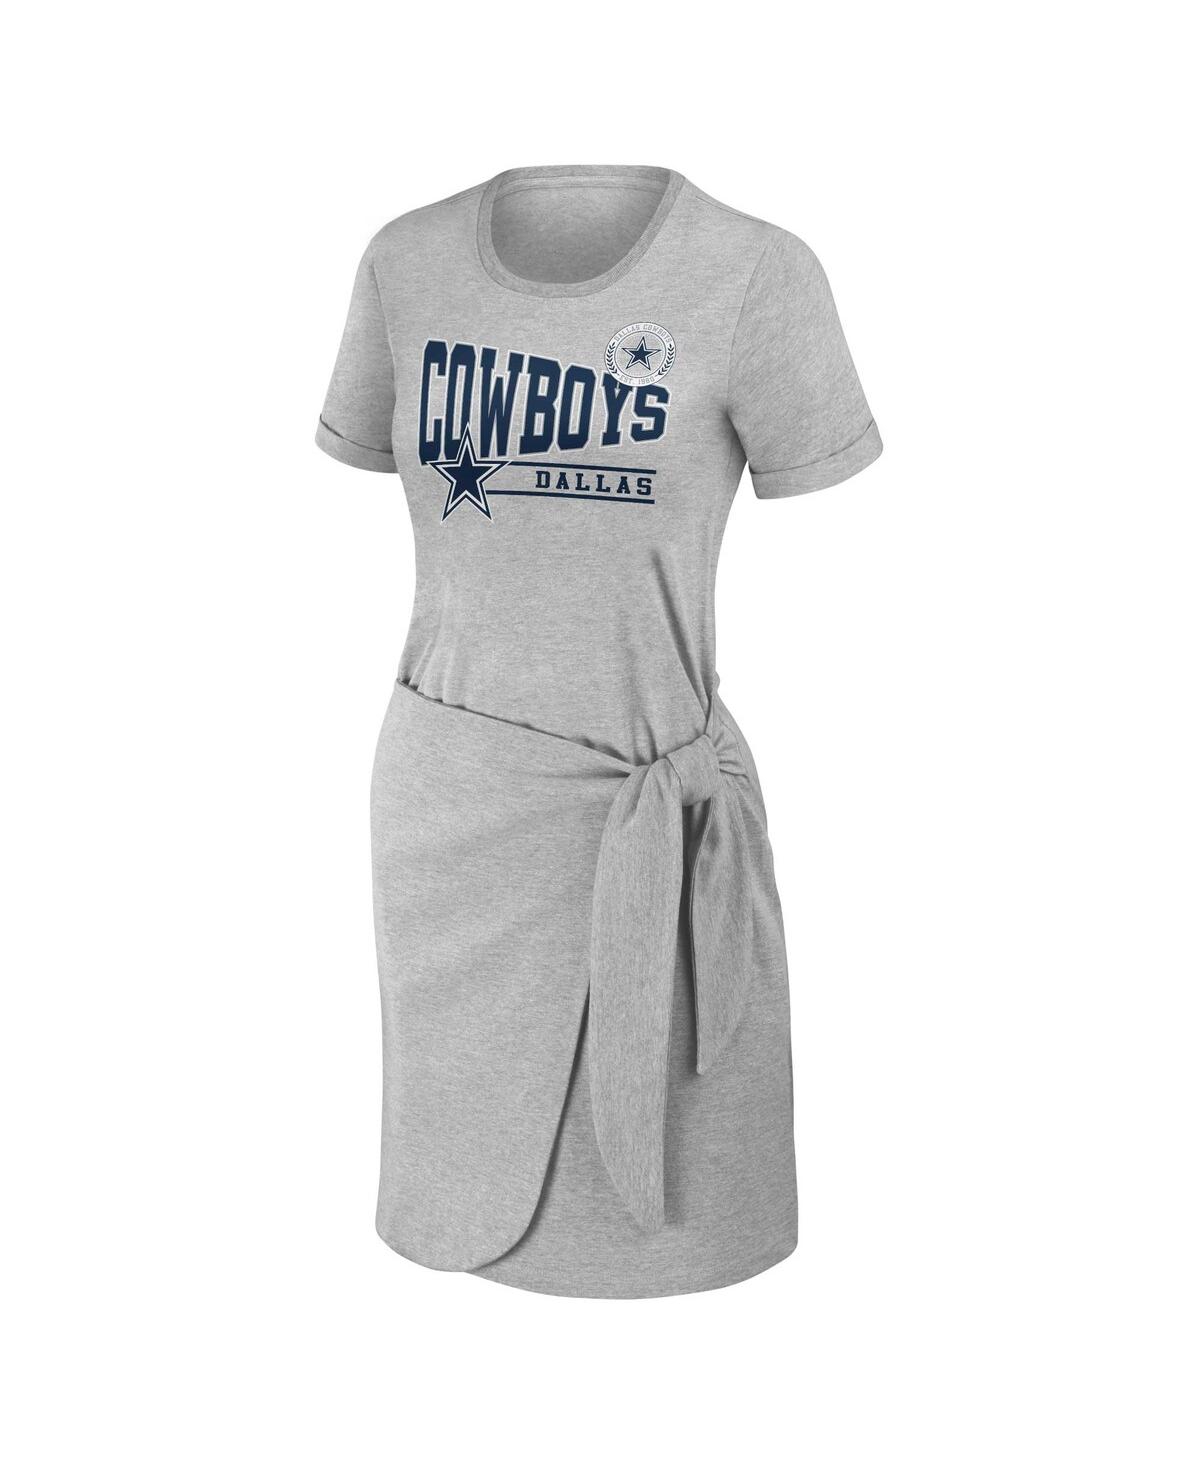 Shop Wear By Erin Andrews Women's  Heather Gray Dallas Cowboys Plus Size Knotted T-shirt Dress